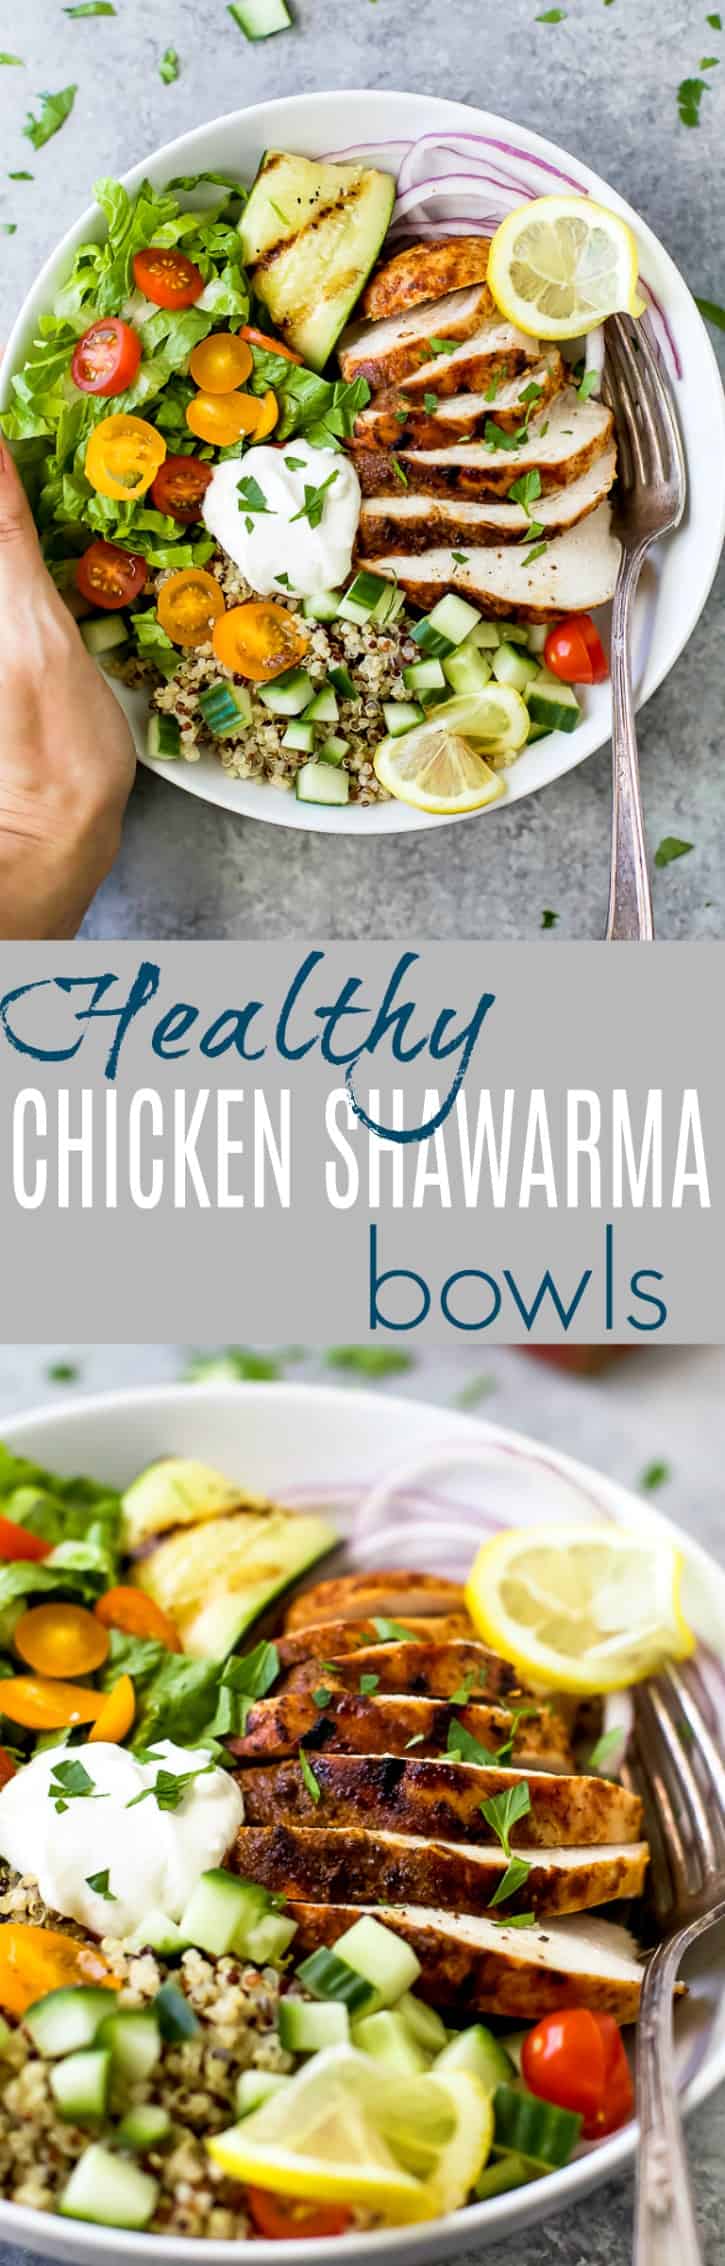 Pinterest collage for Healthy Chicken Shawarma Bowls recipe